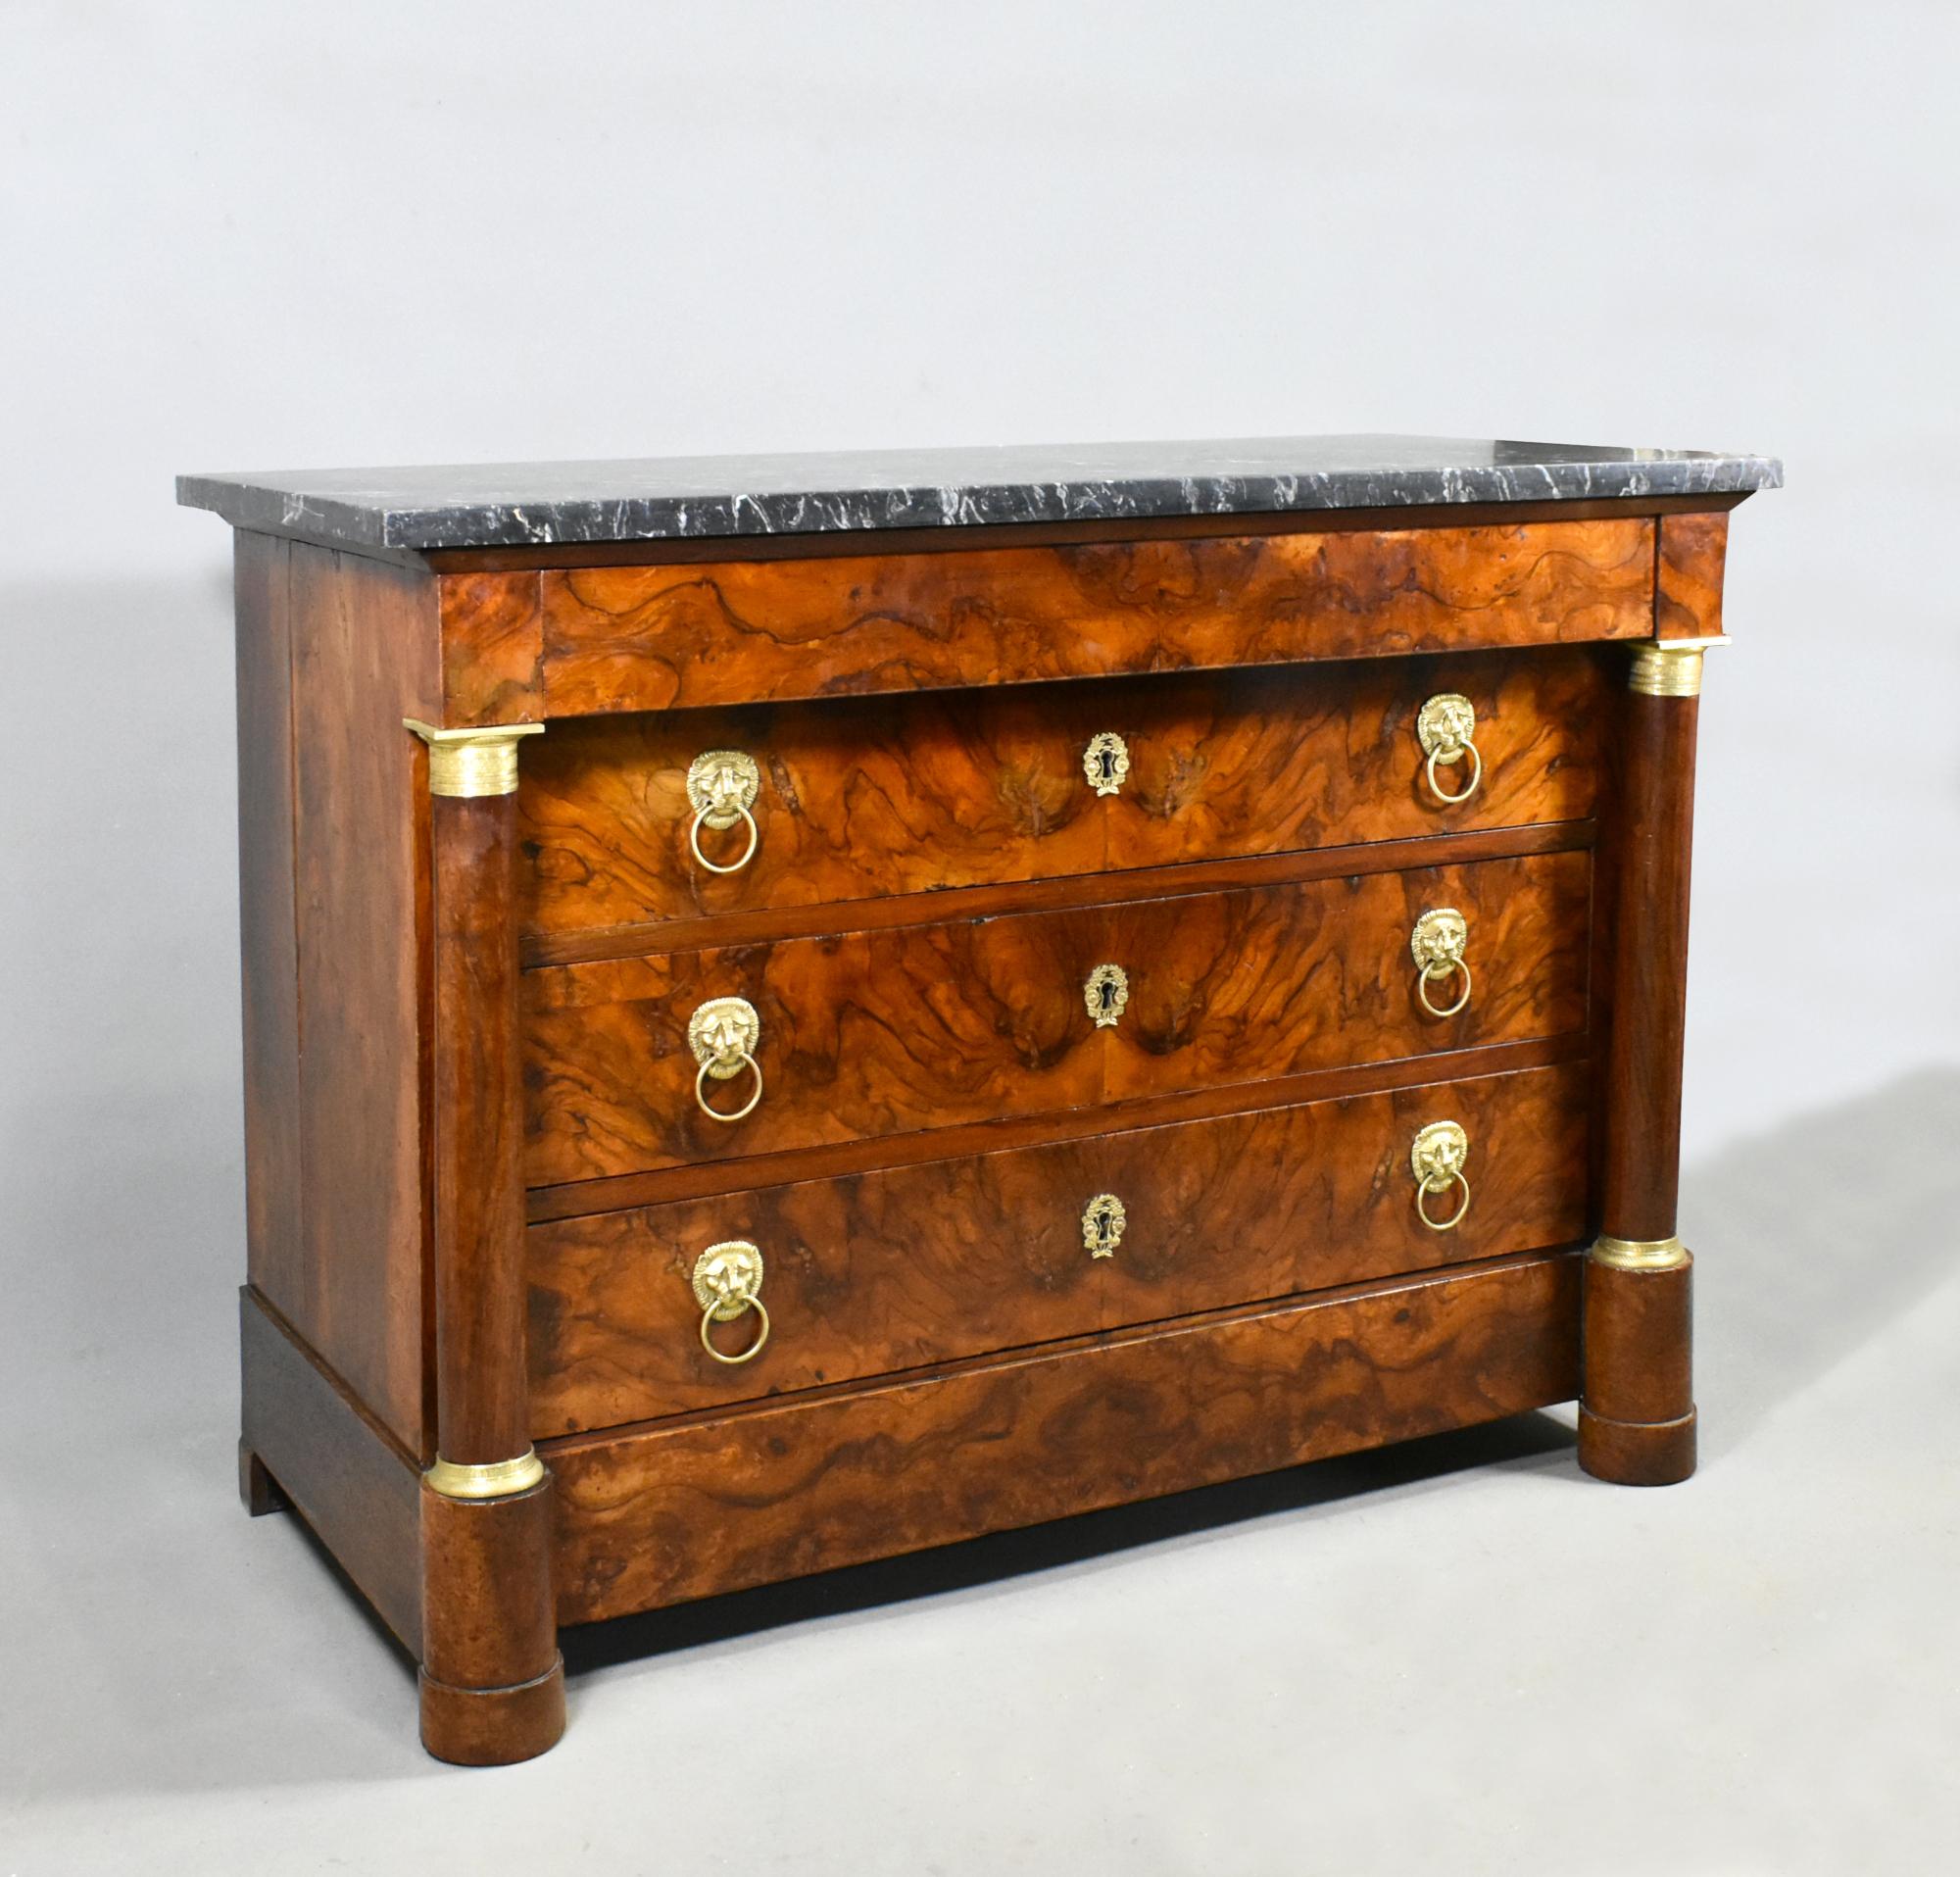 Antique French Empire Walnut Commode Early 19th Century 

This impressive Empire Commode features a beautiful black and white fossilised free standing marble top (25 mm thick) with a richly aged colour and patina. 

The four full-width drawers are